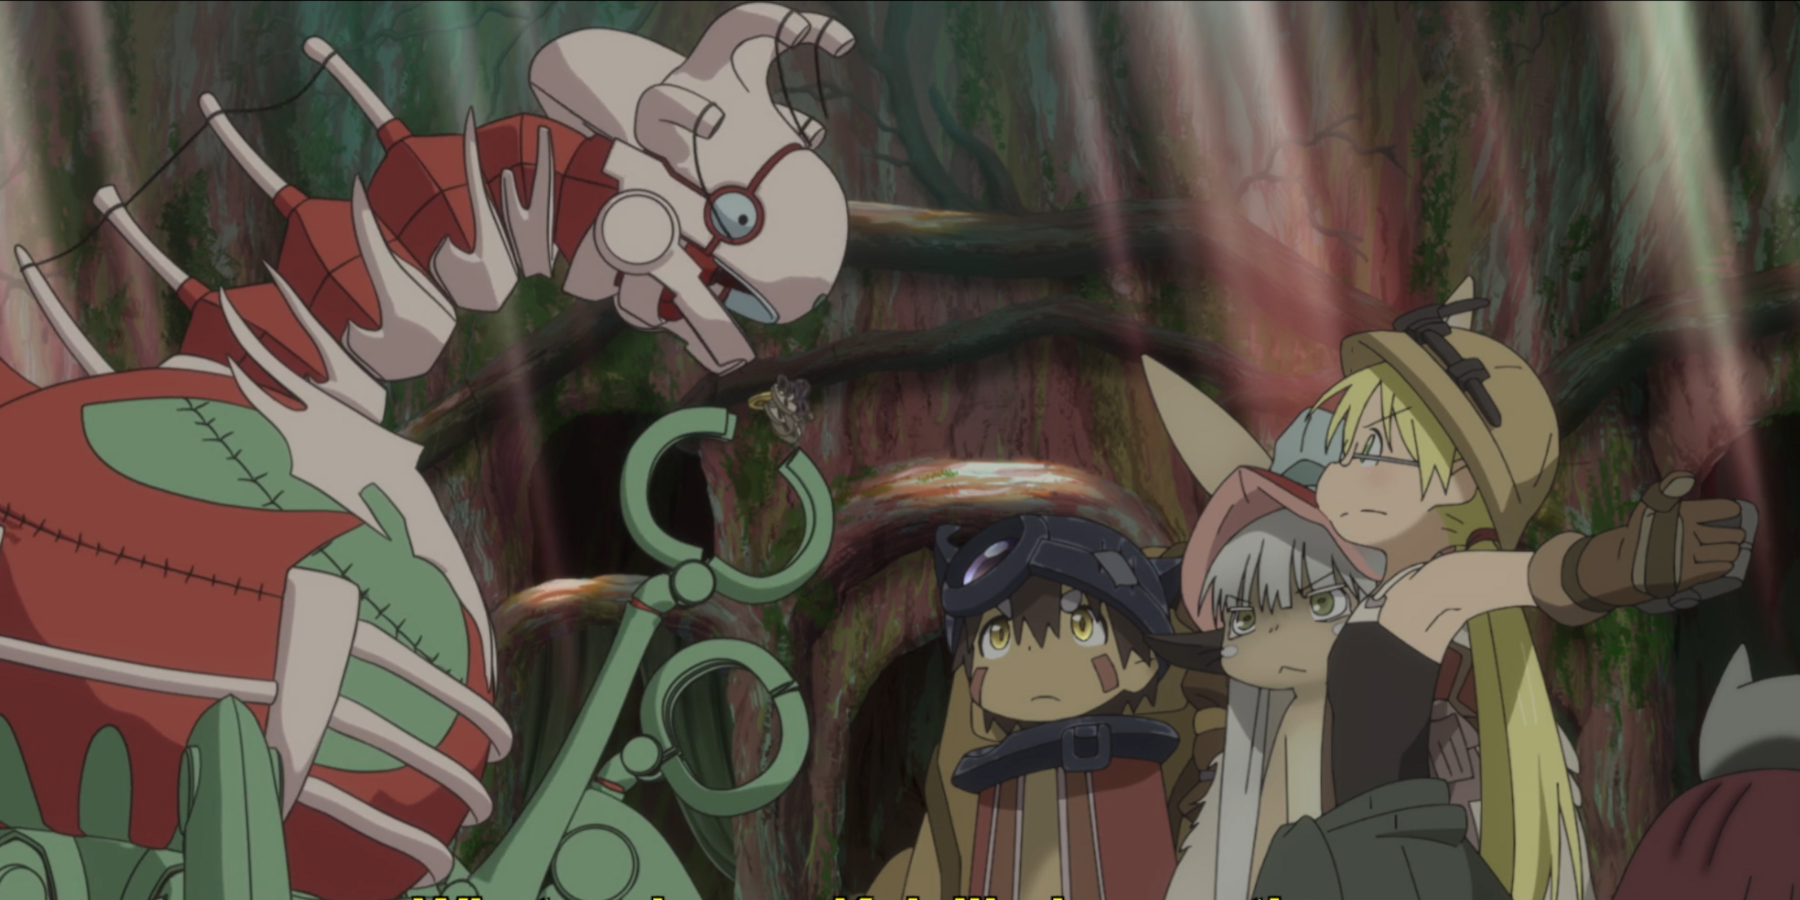 Made in Abyss Season 2, Episode 3